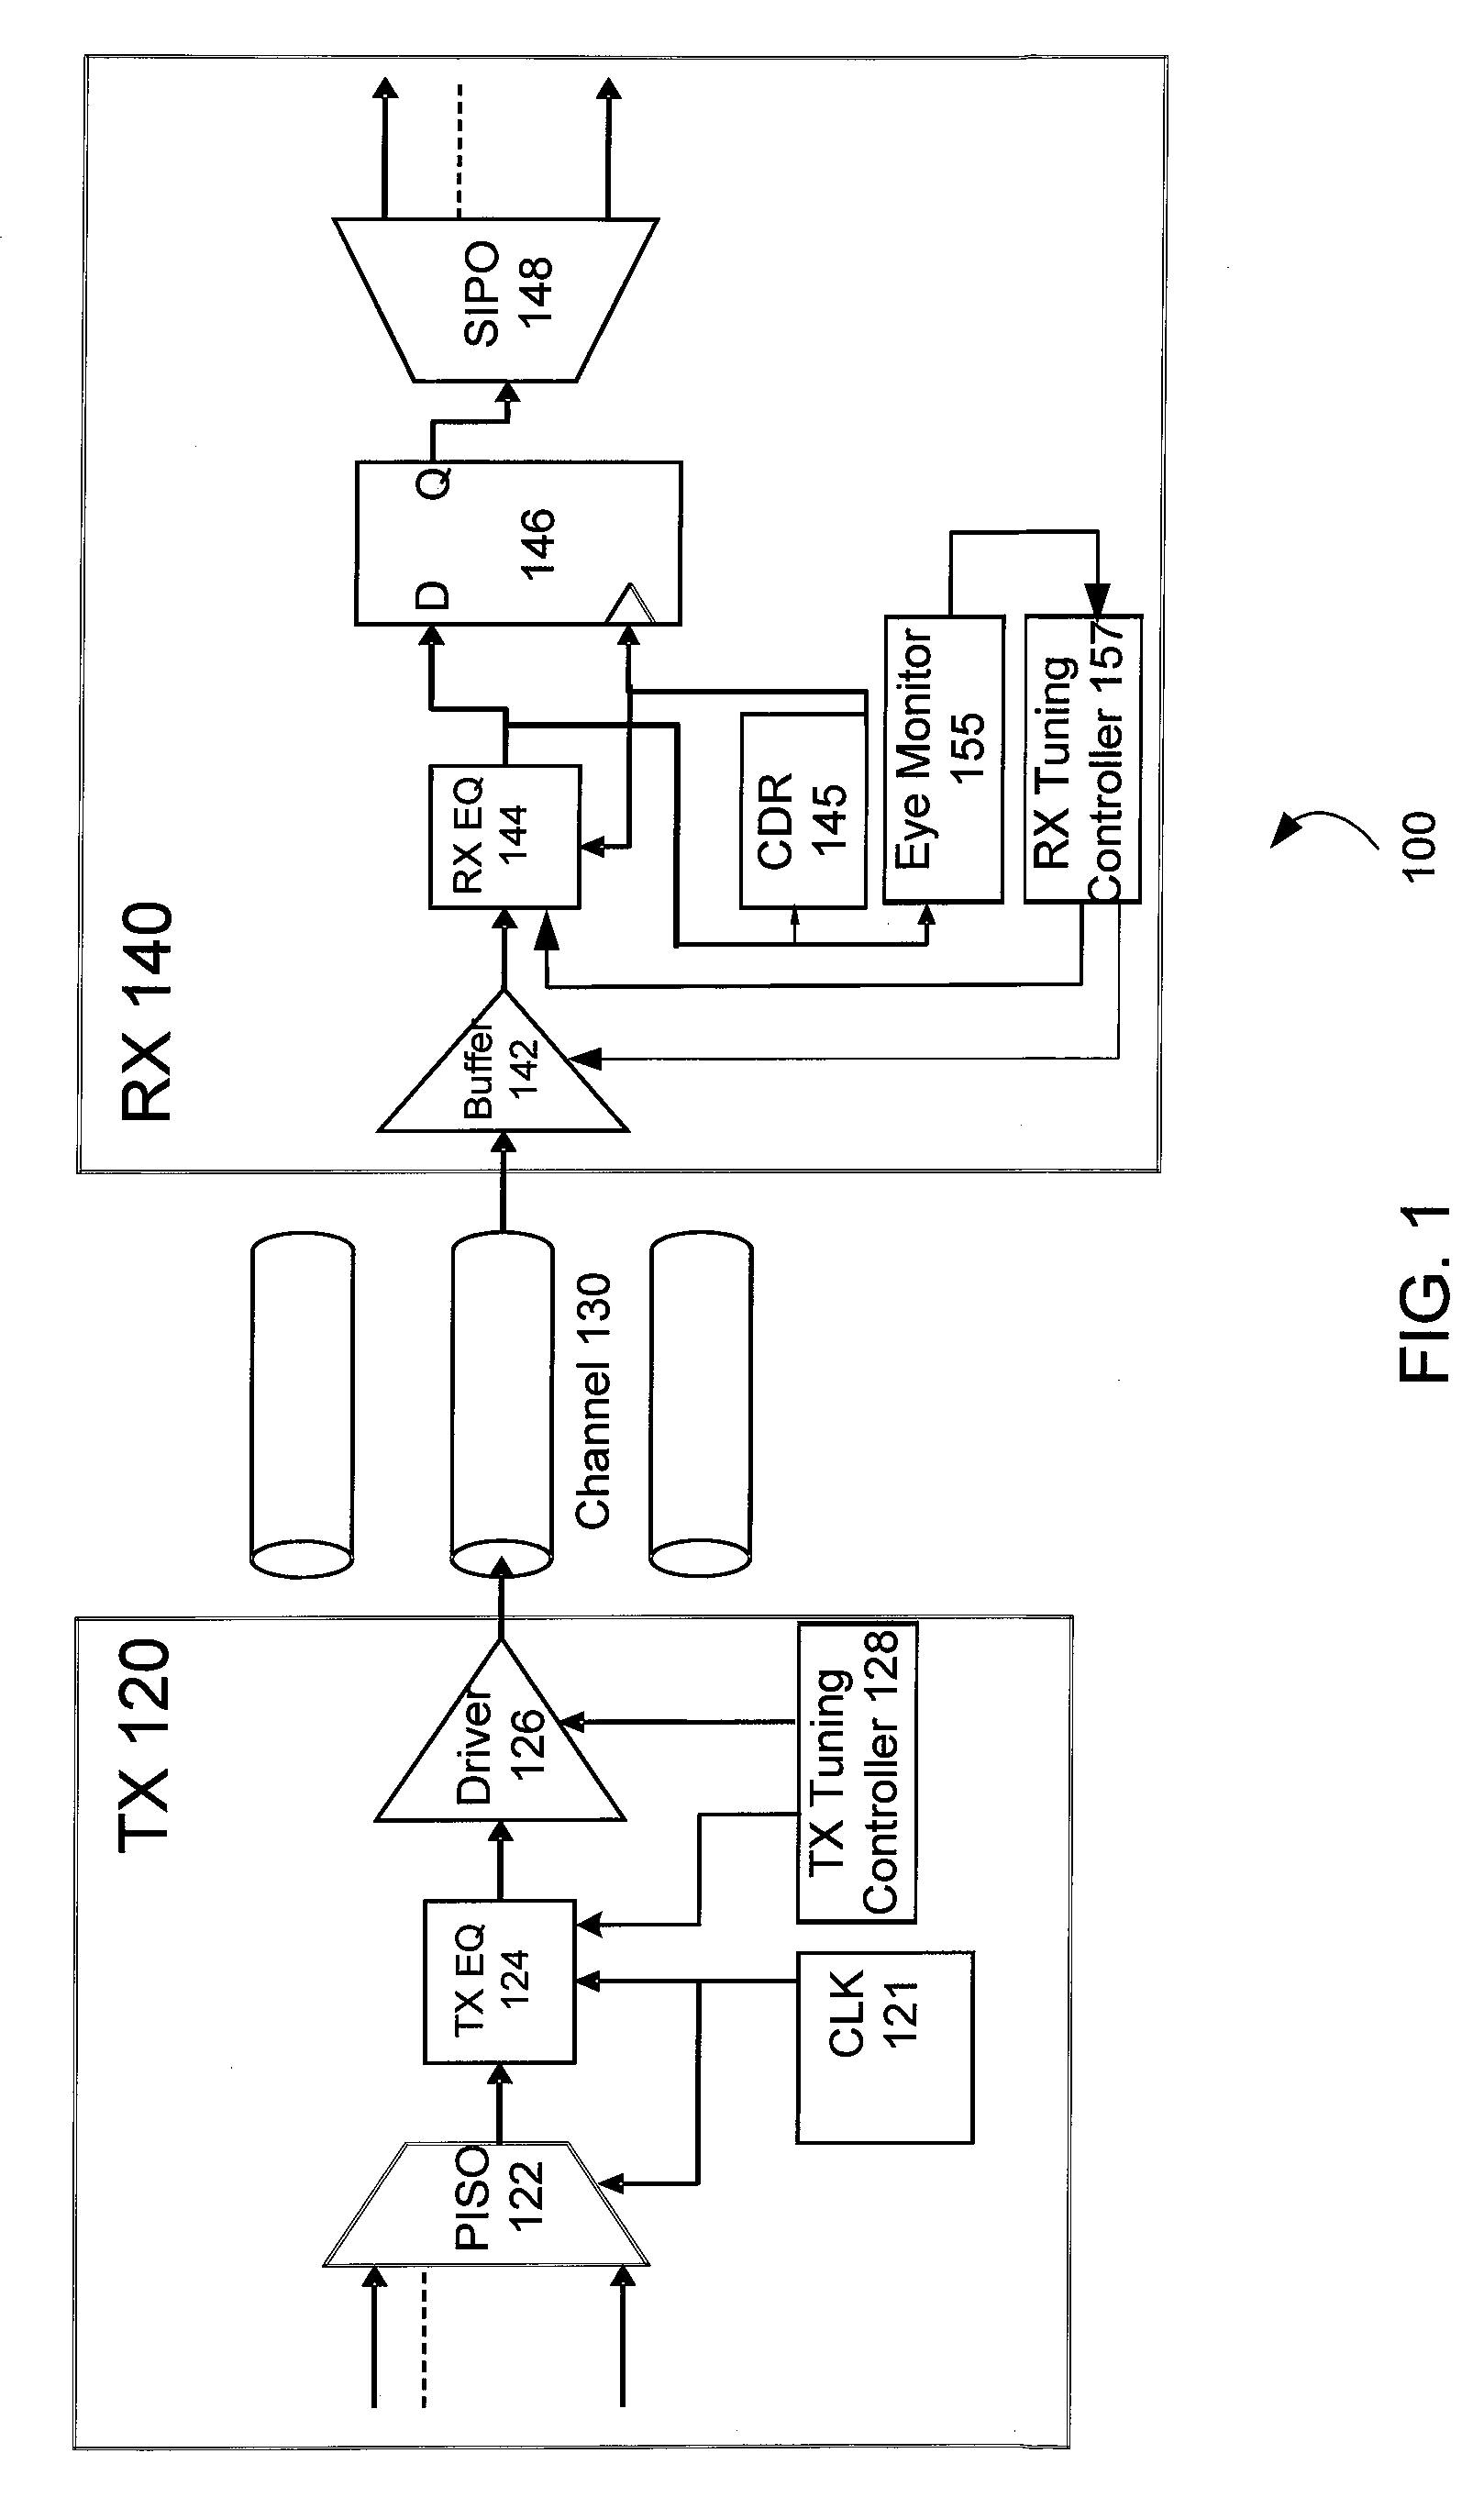 Apparatus and methods for tuning a communication link for power conservation